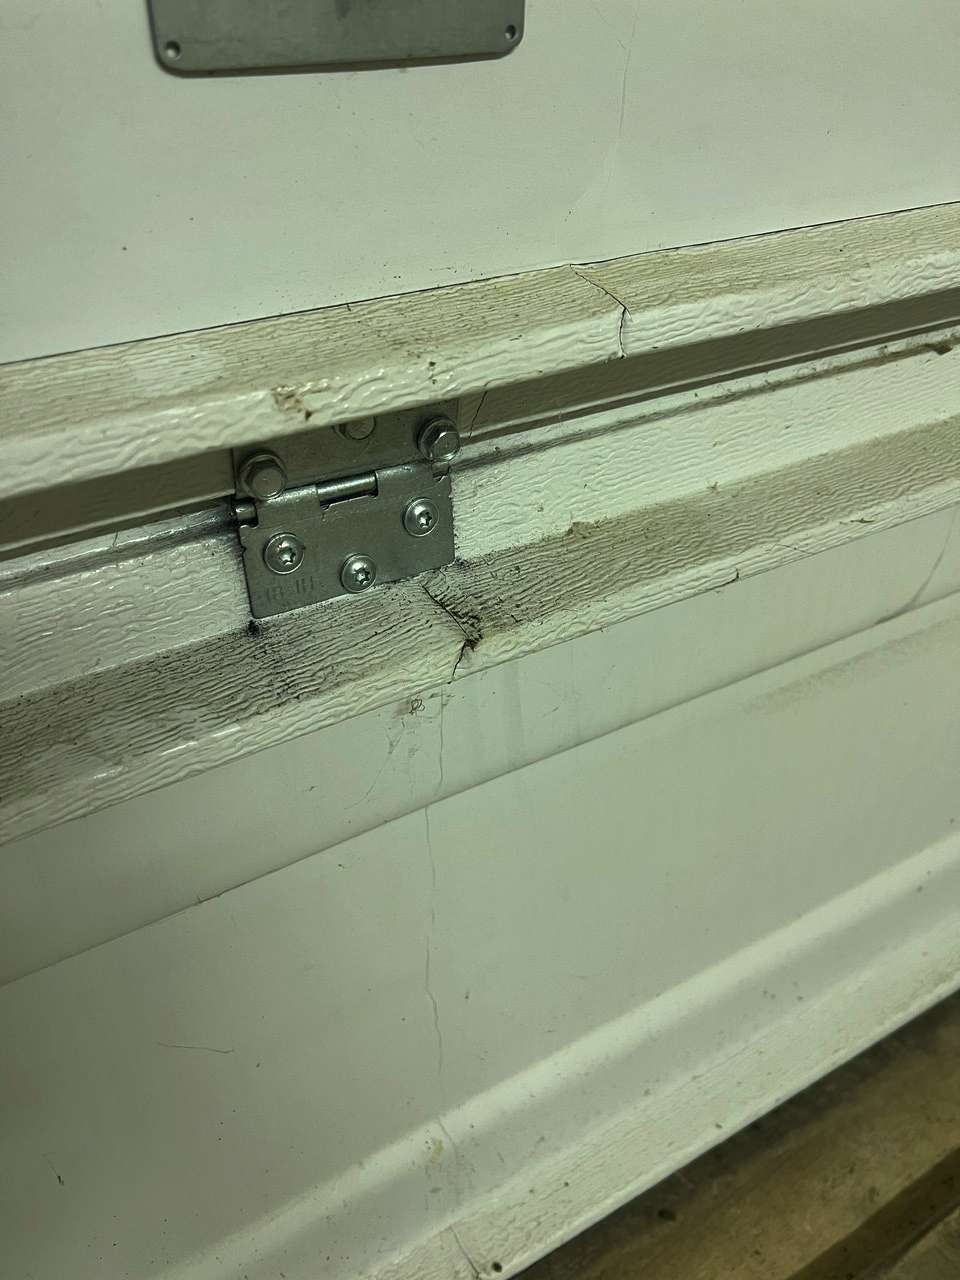 The cracks in this section might look familar if you have a Wayne Dalton 9100 garage door.